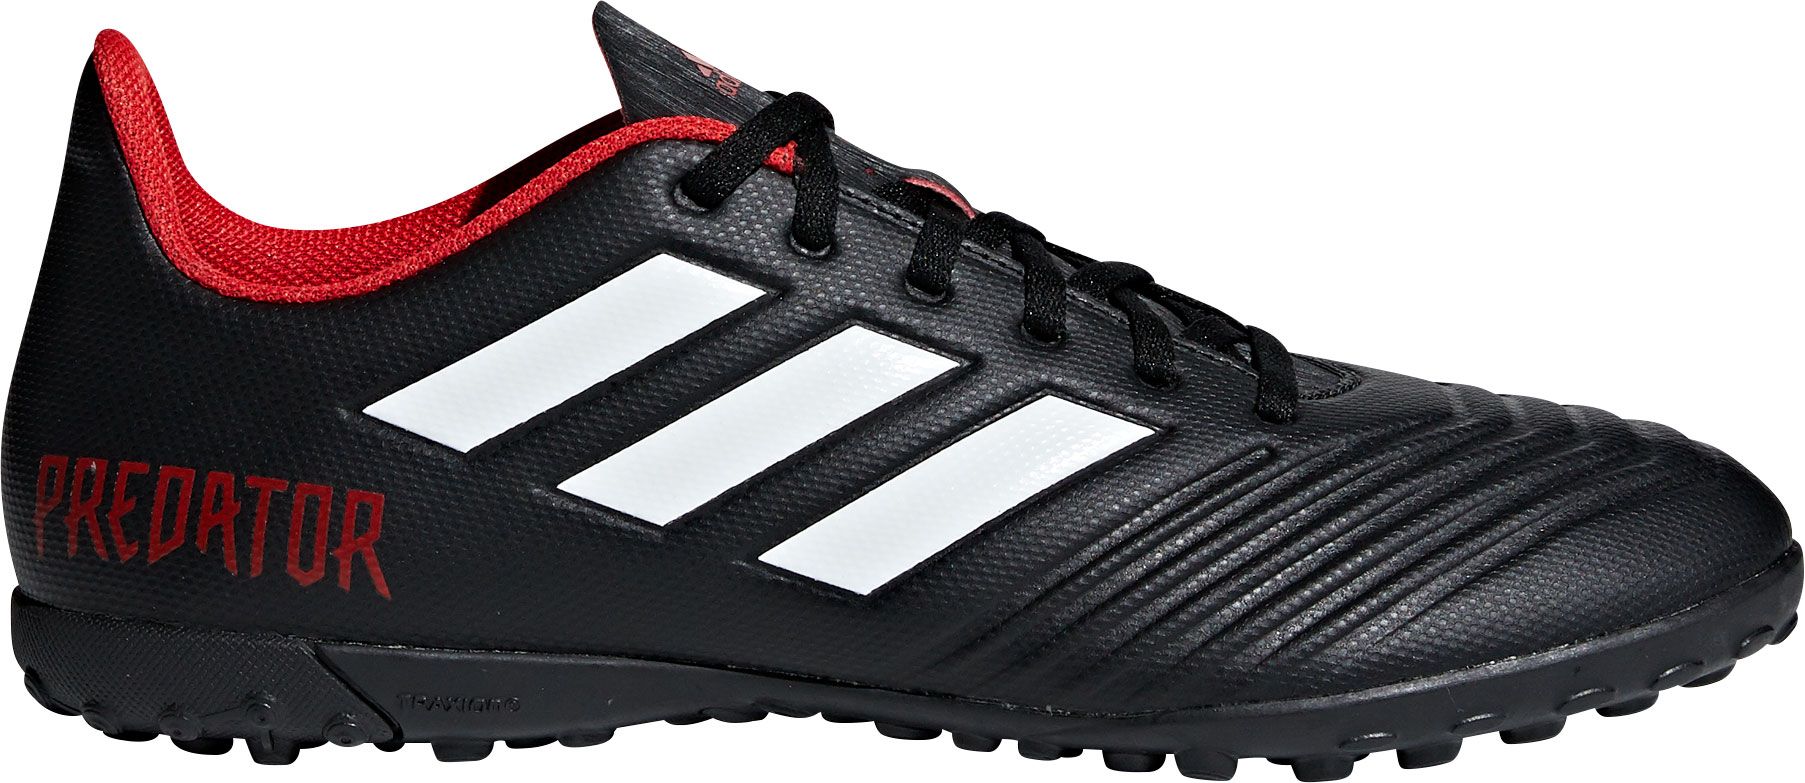 mens soccer turf cleats